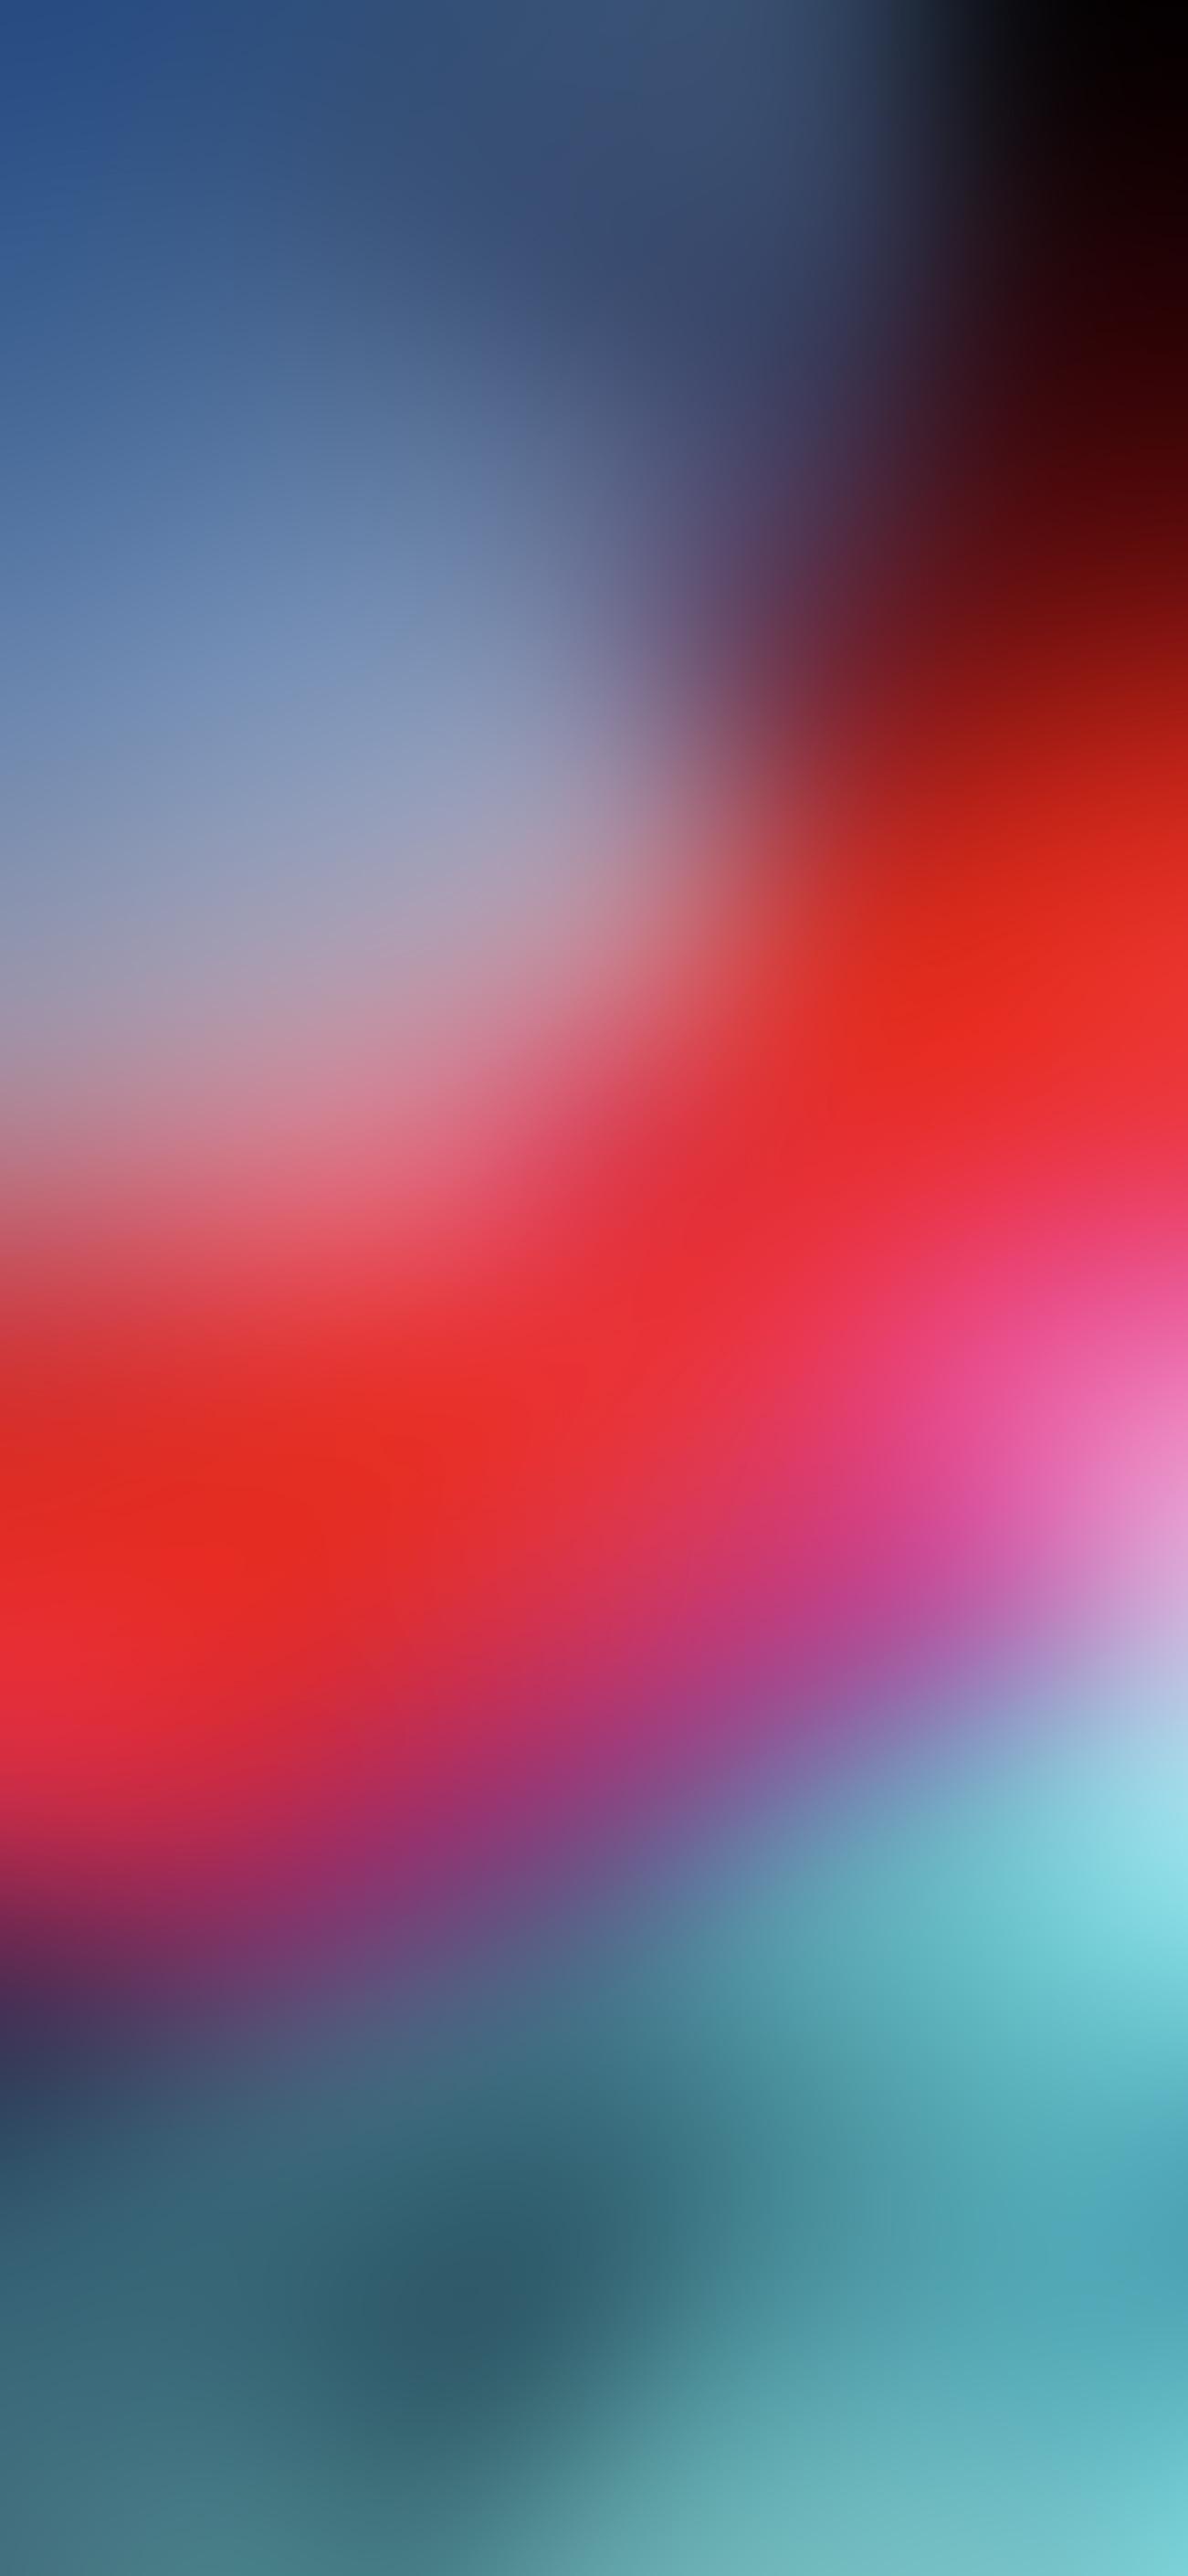 1301 x 2820 · jpeg - Blurred iOS 12 Stock Wallpaper - Wallpapers Central